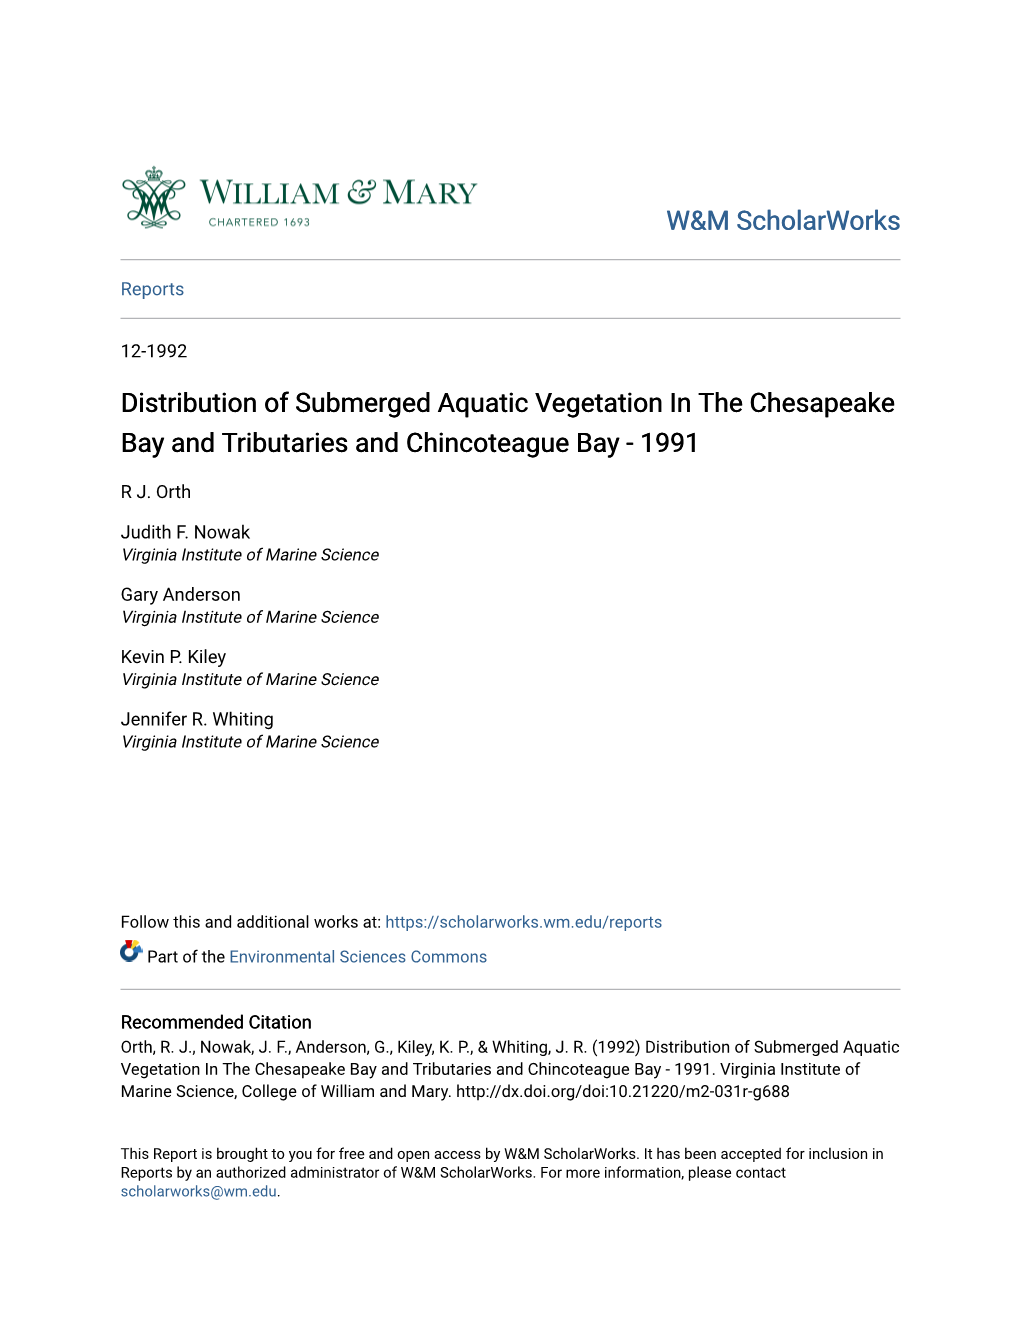 Distribution of Submerged Aquatic Vegetation in the Chesapeake Bay and Tributaries and Chincoteague Bay - 1991